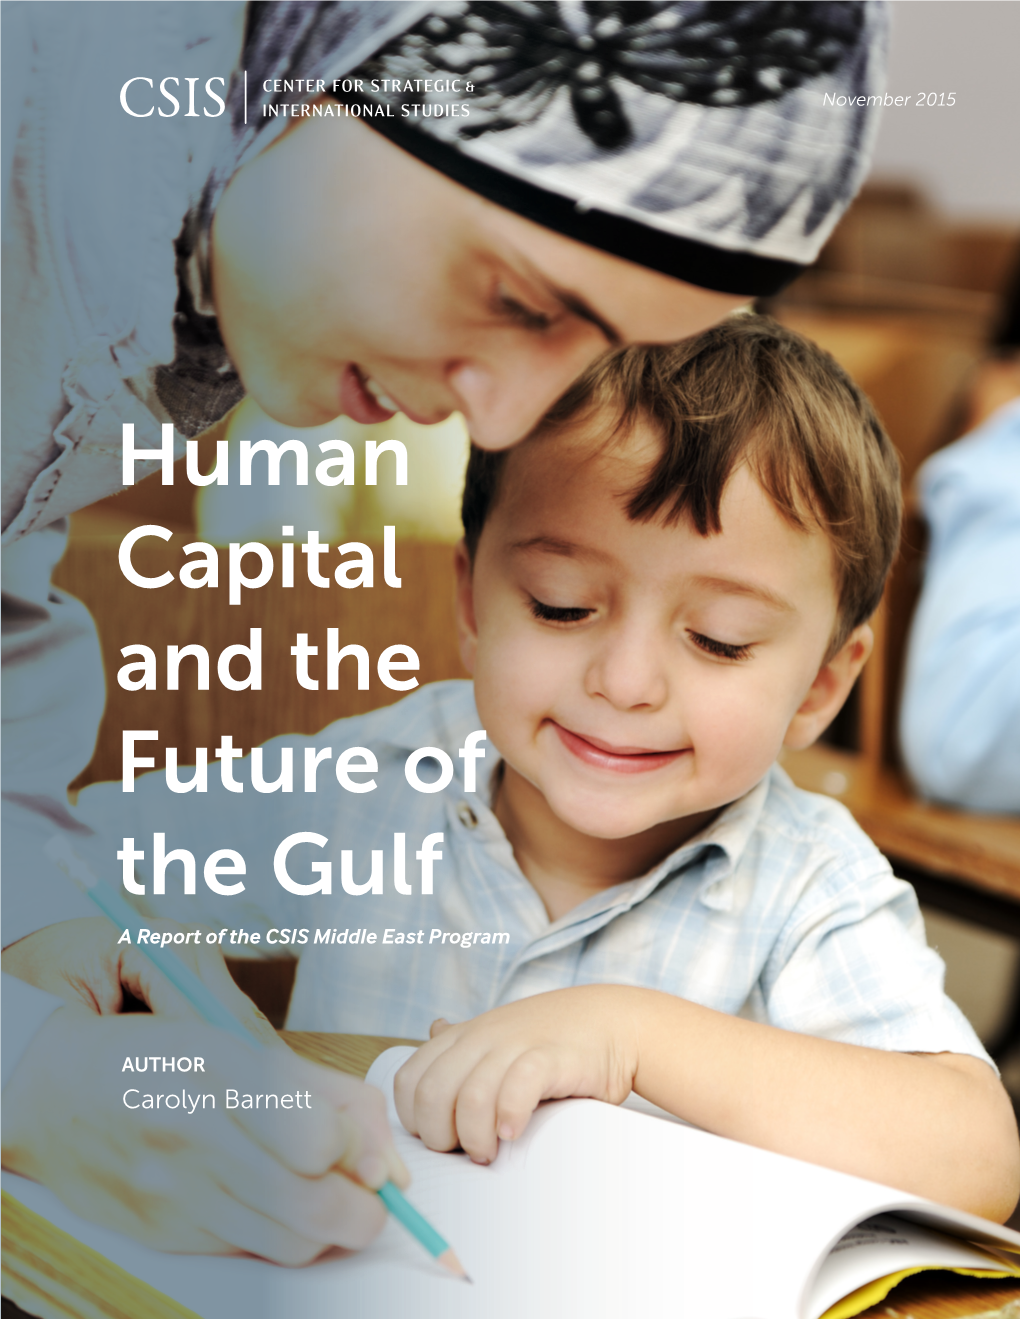 Human Capital and the Future of the Gulf a Report of the CSIS Middle East Program